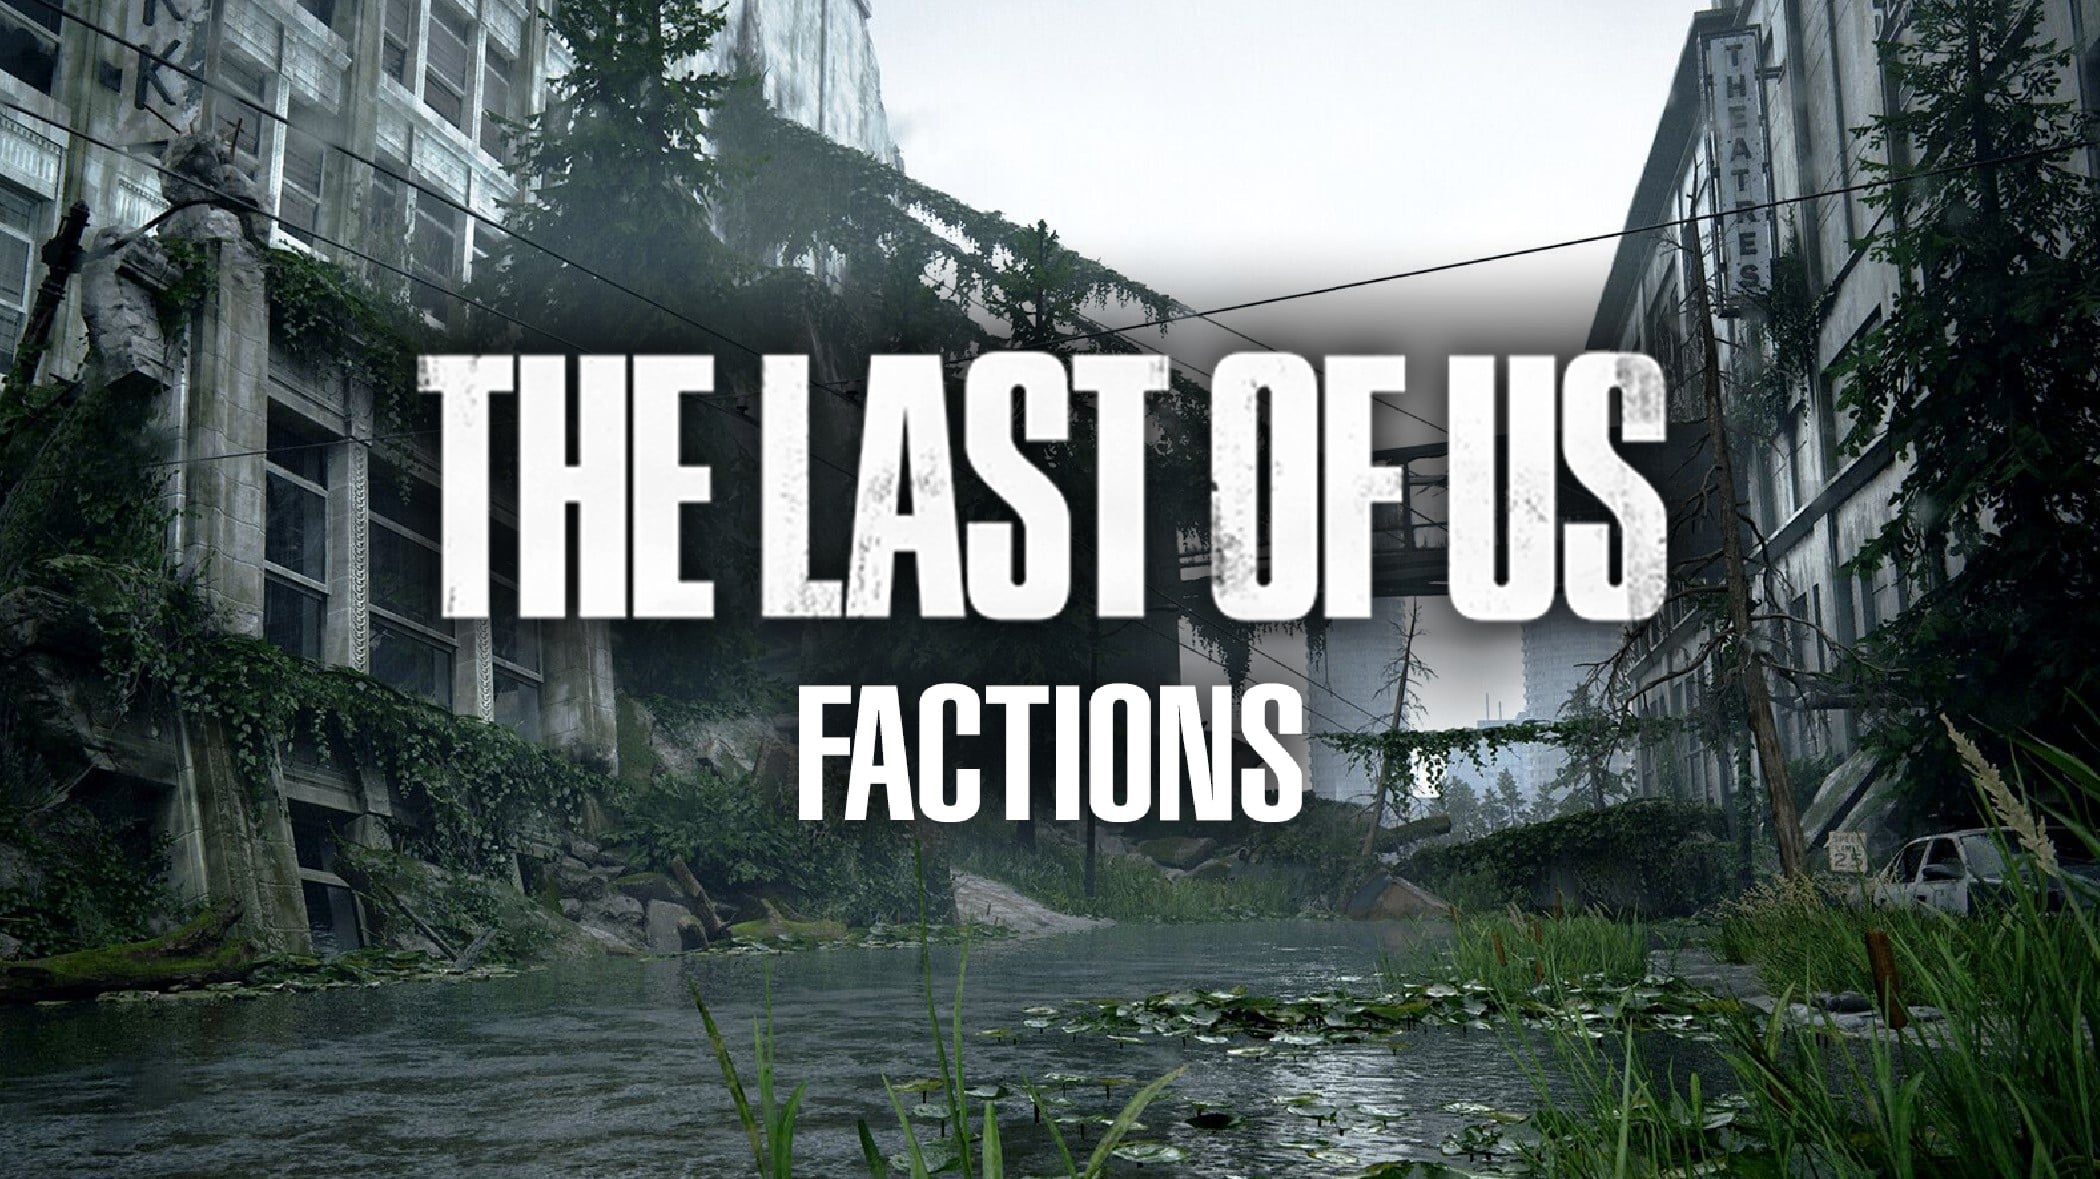 The Last Us Factions standalone game: Multiplayer details, concept art, - Dexerto